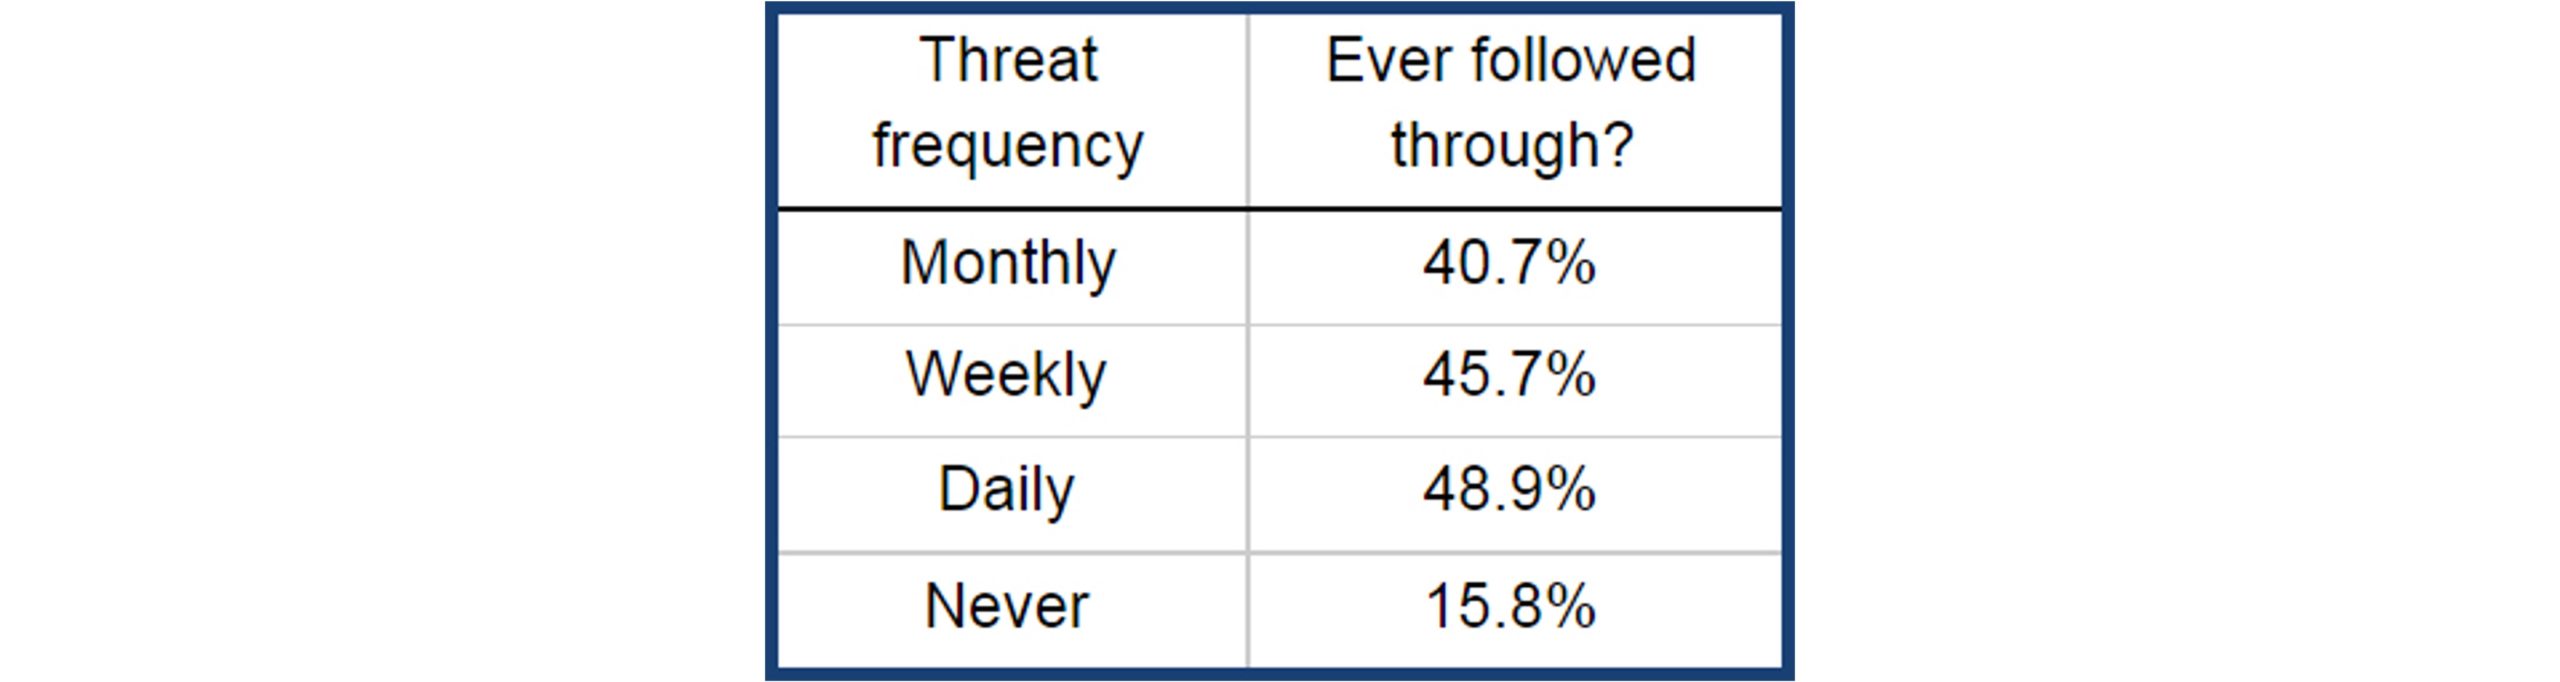 threat frequency vs follow through chart survey statistic